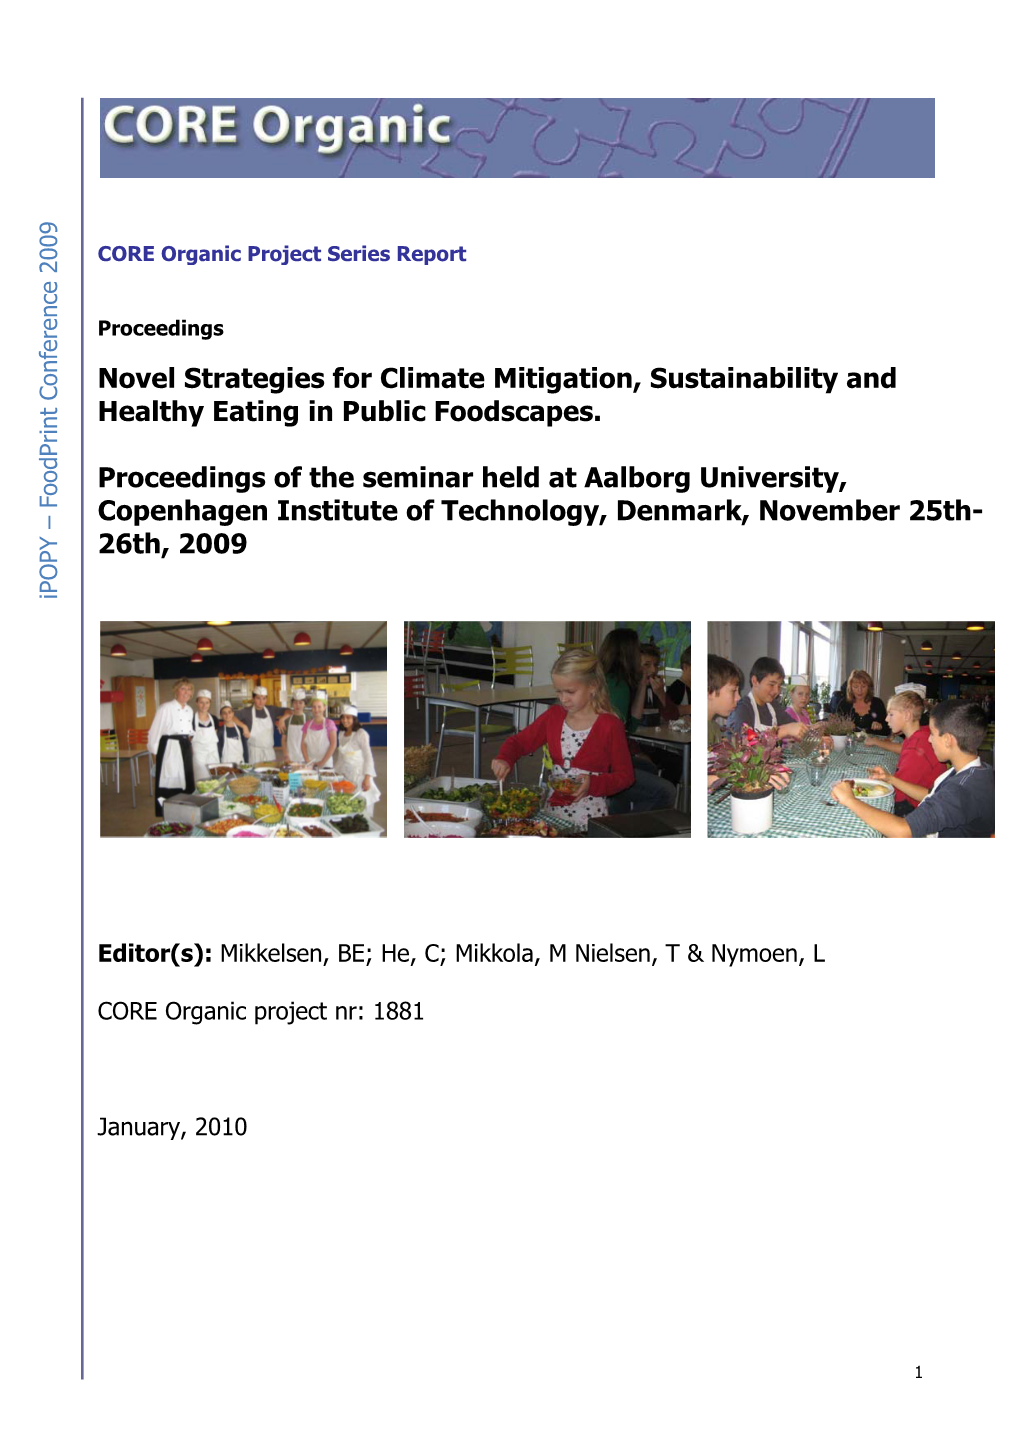 Novel Strategies for Climate Mitigation, Sustainability and Healthy Eating in Public Foodscapes. Proceedings of the Seminar Held